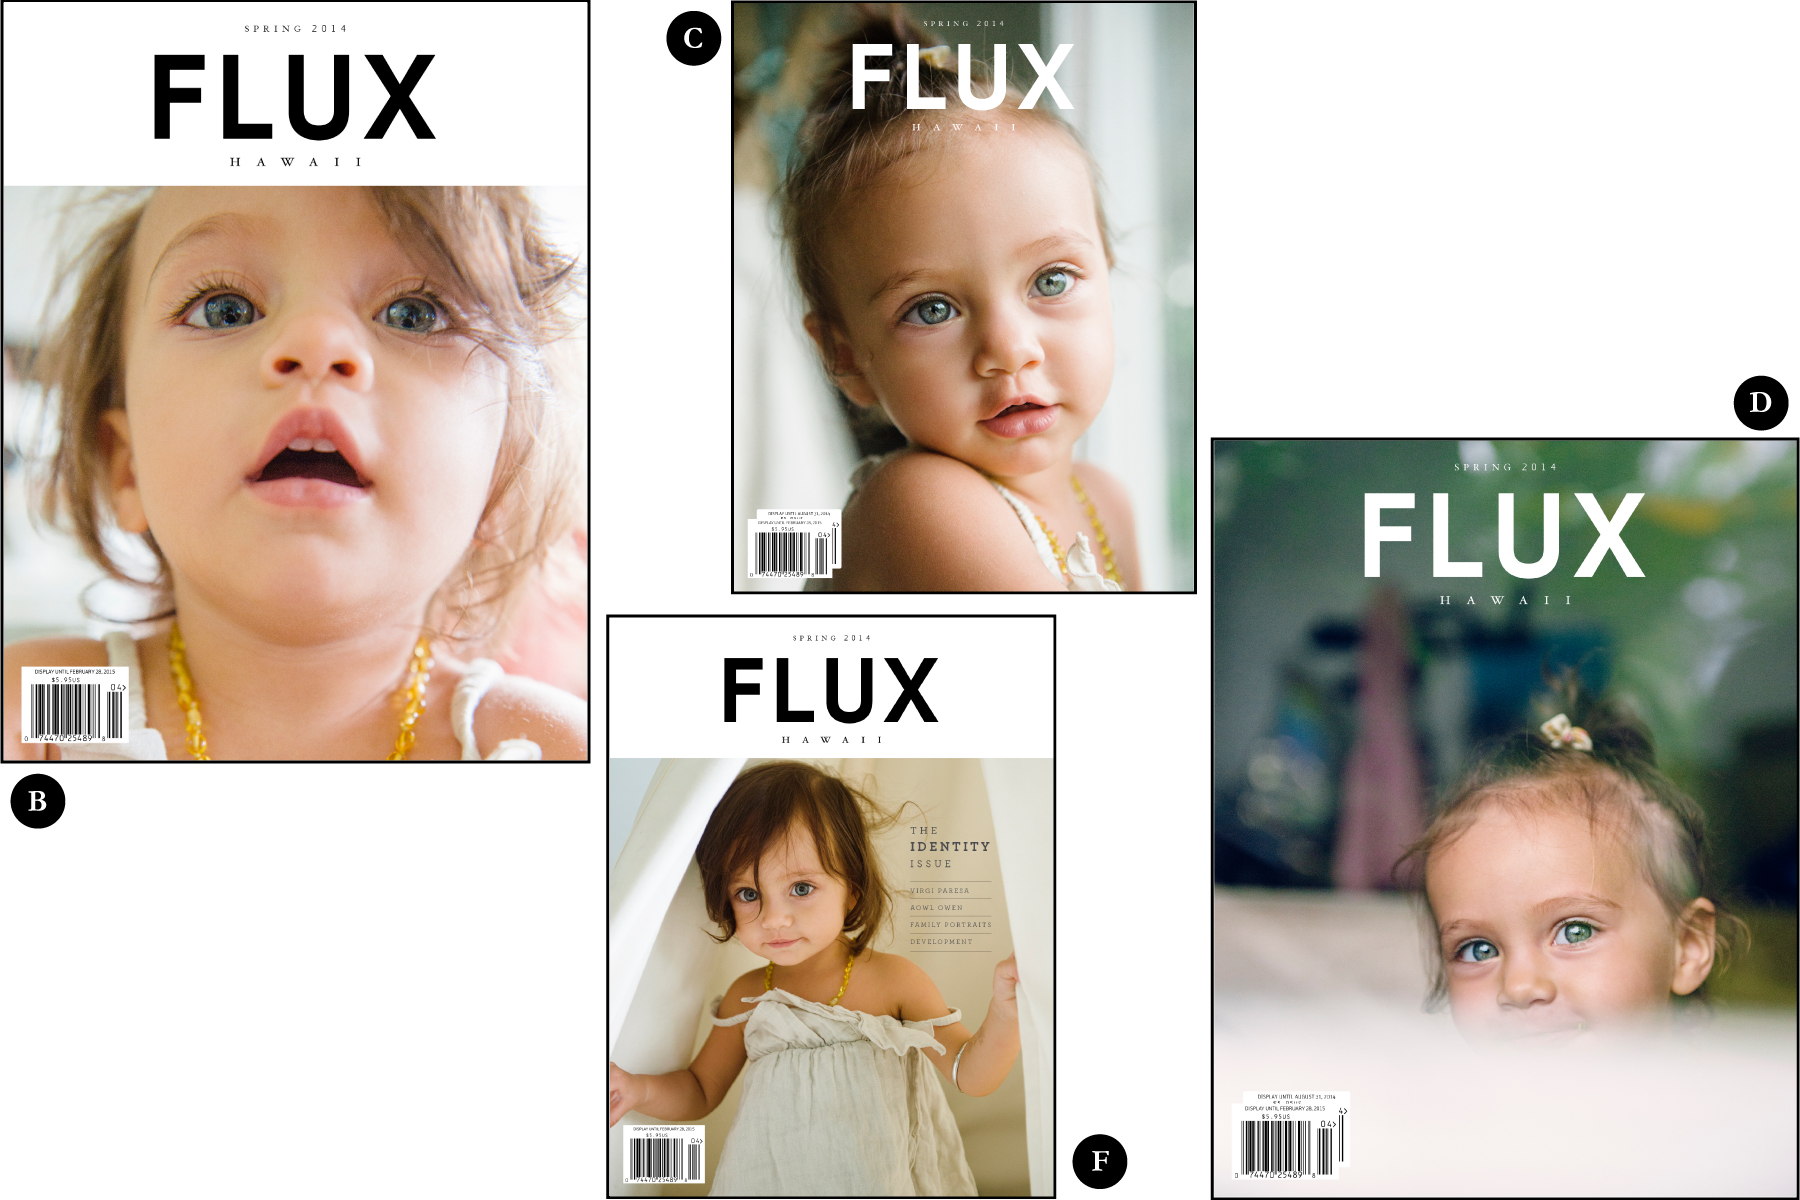 FLUX Hawaii Identity covers